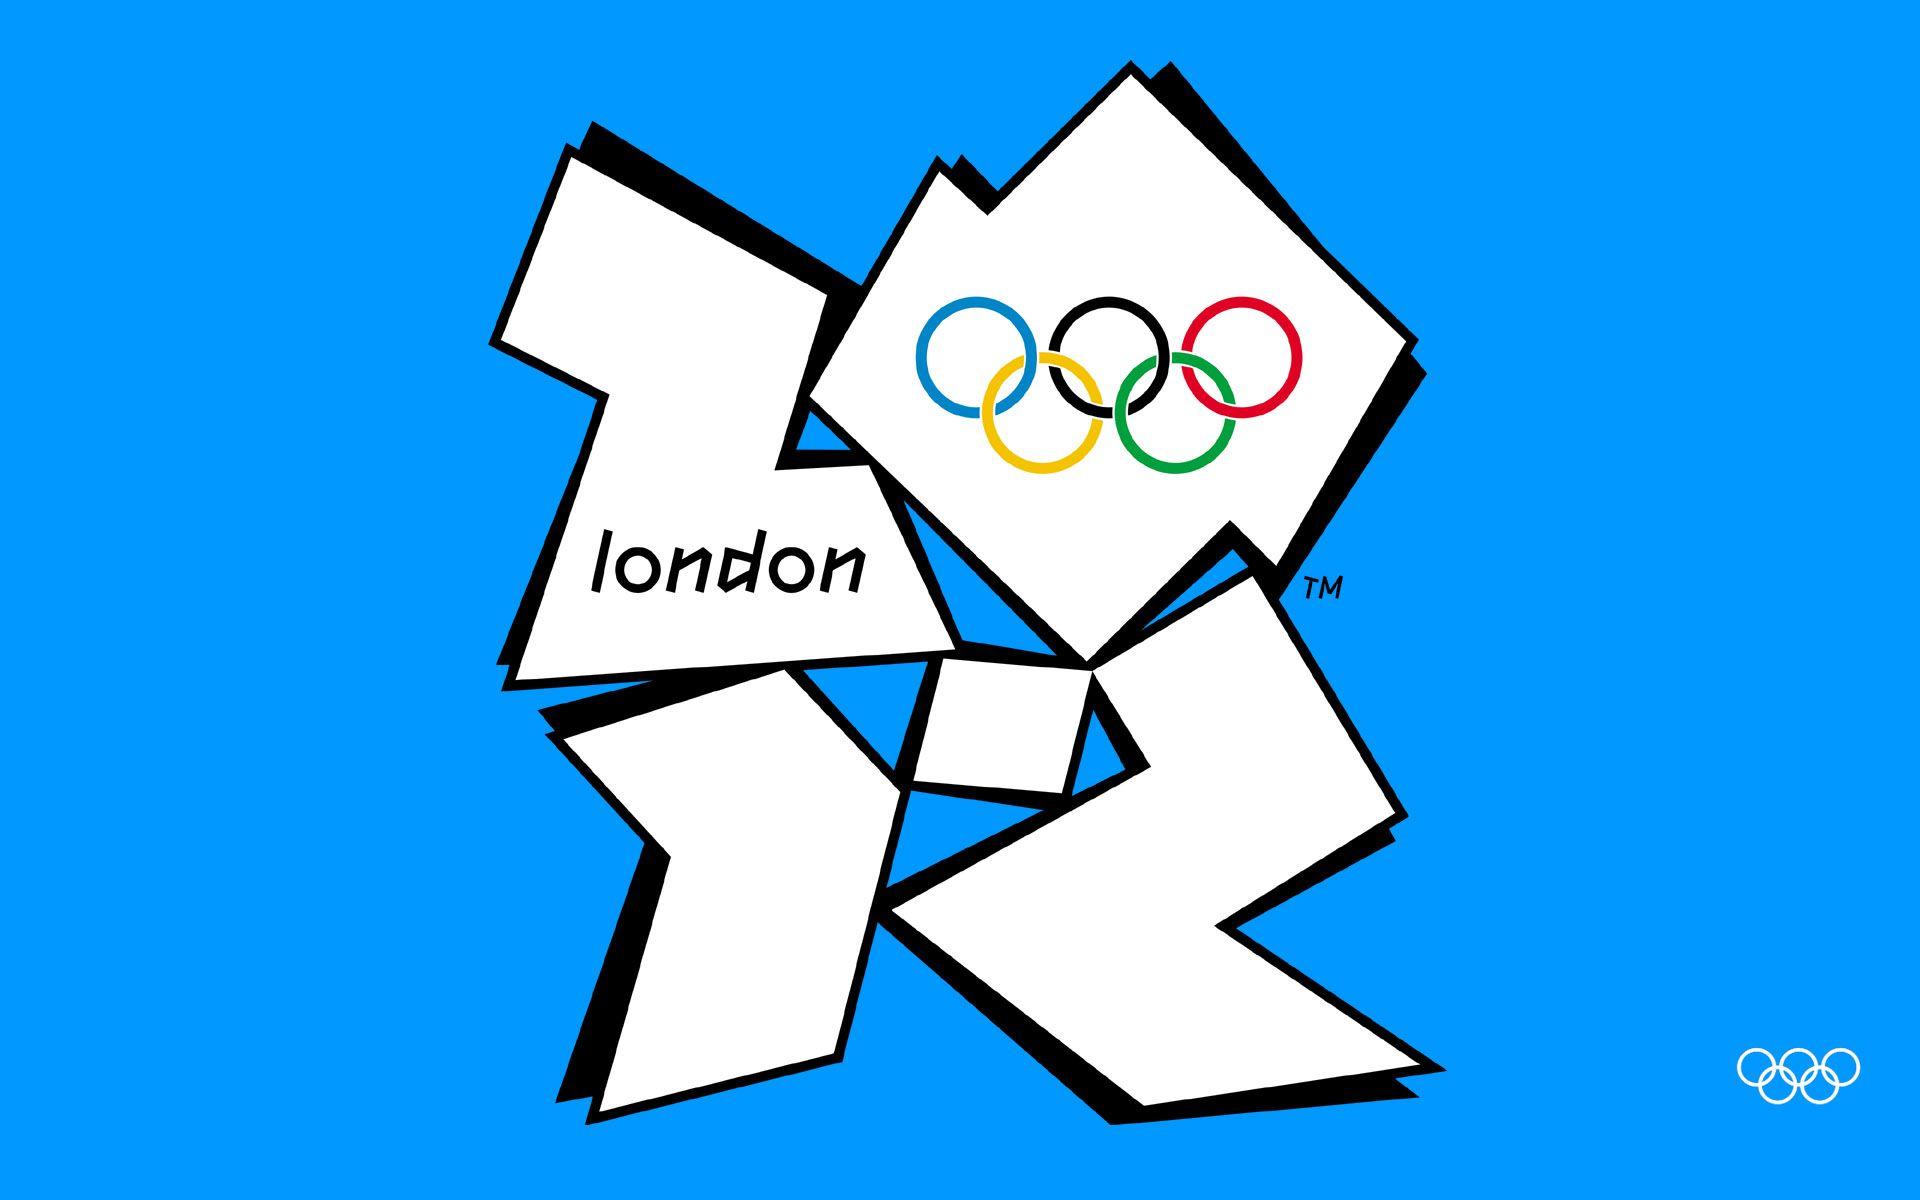 London 2012 Olympics Logo - London 2012 Olympic Logo: Was It Really So Bad After All? – Adweek